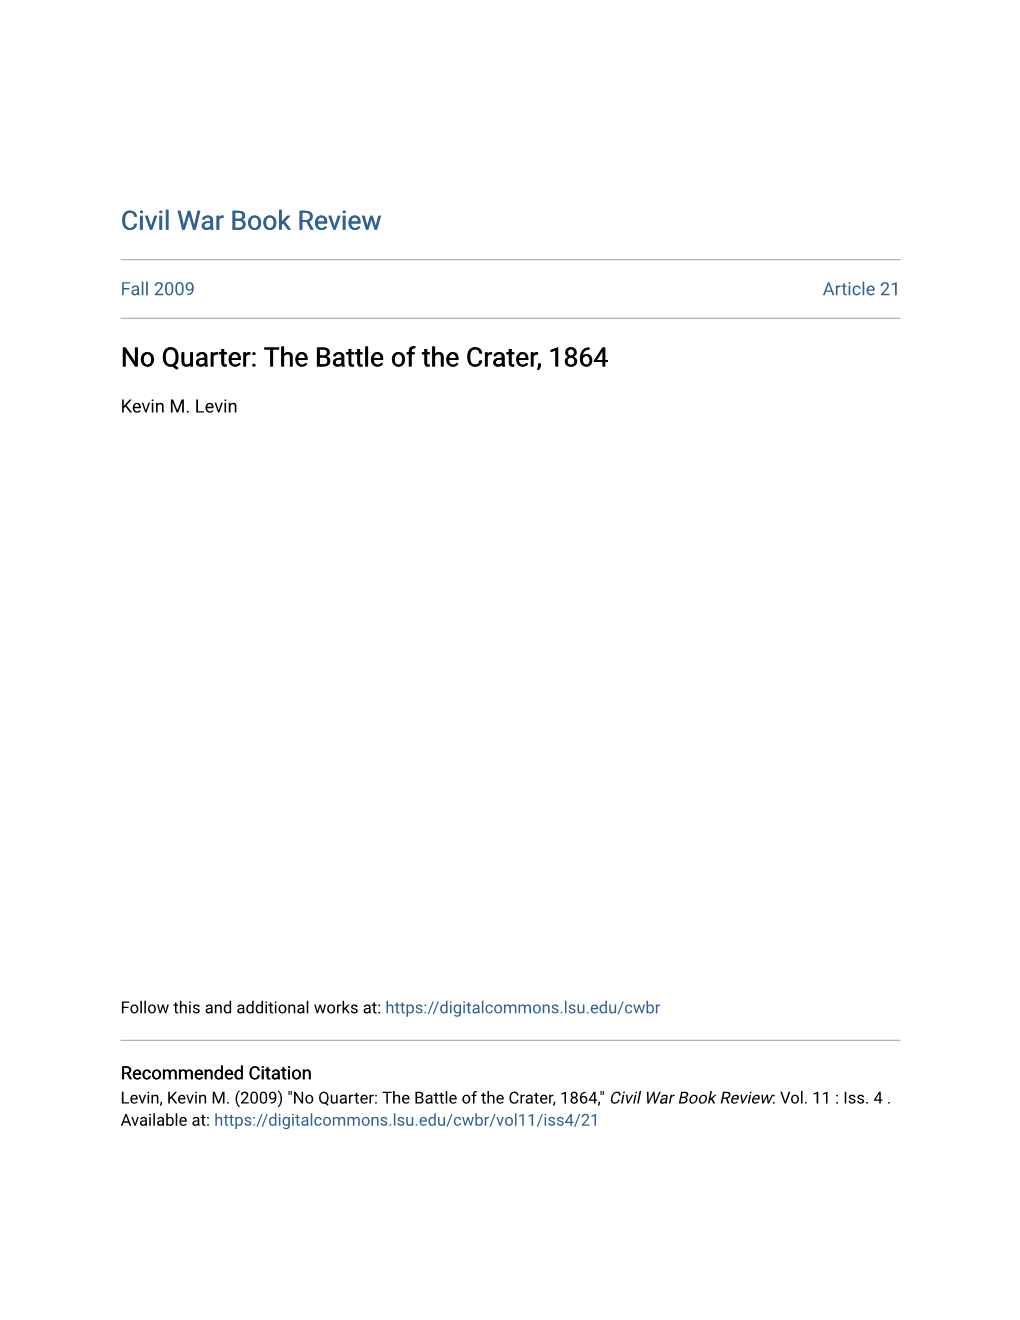 No Quarter: the Battle of the Crater, 1864